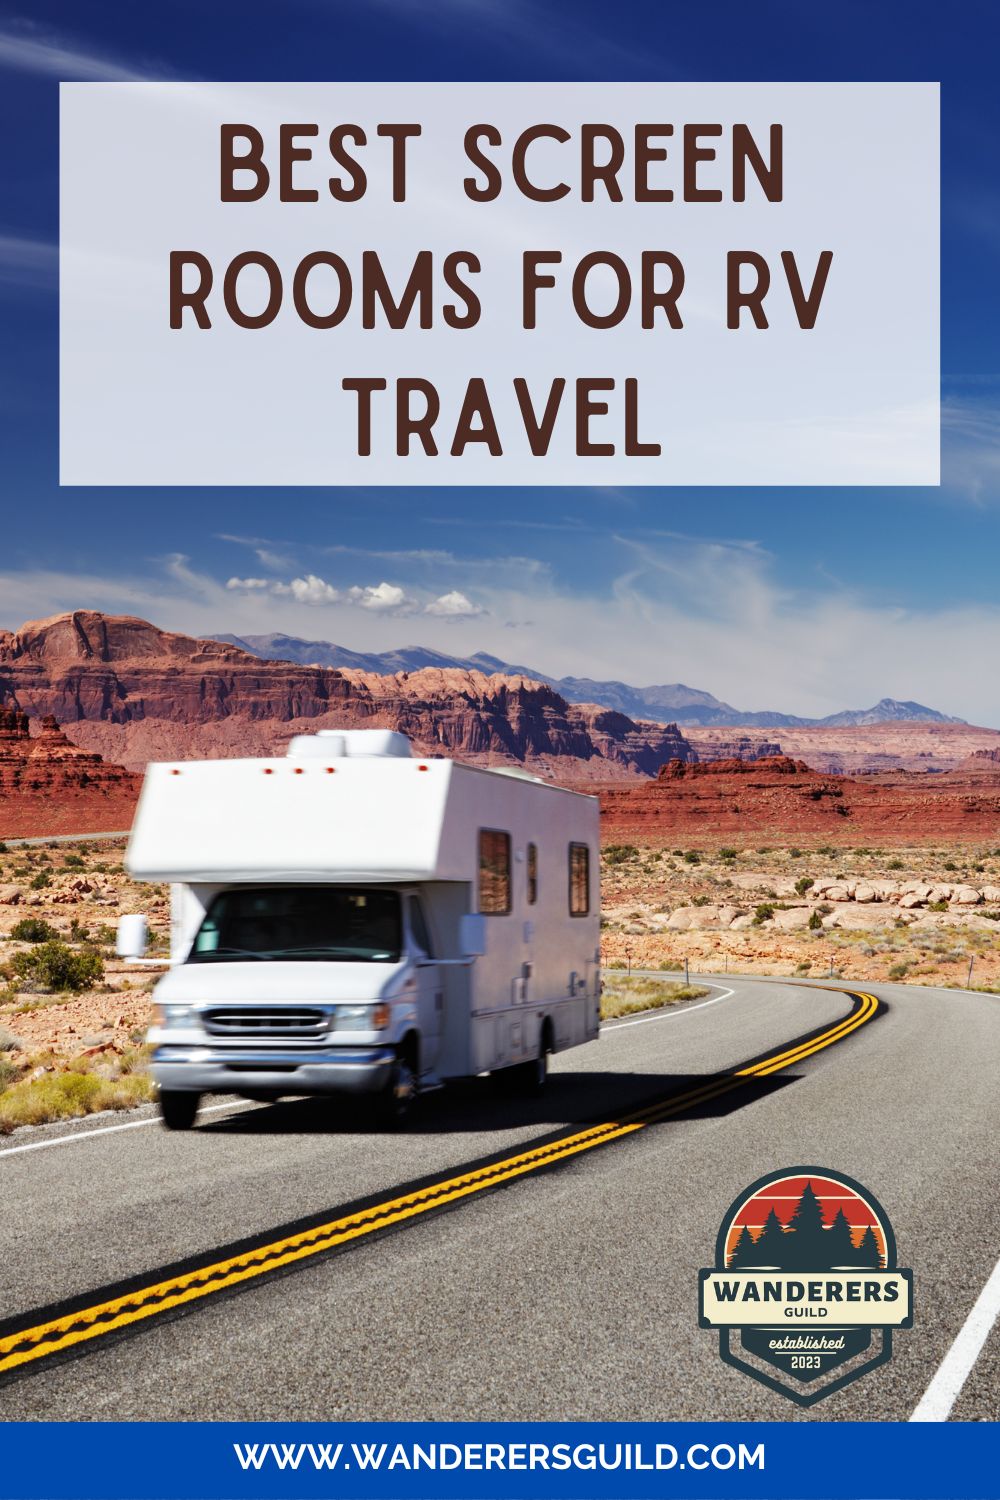 title for best screen room for RV